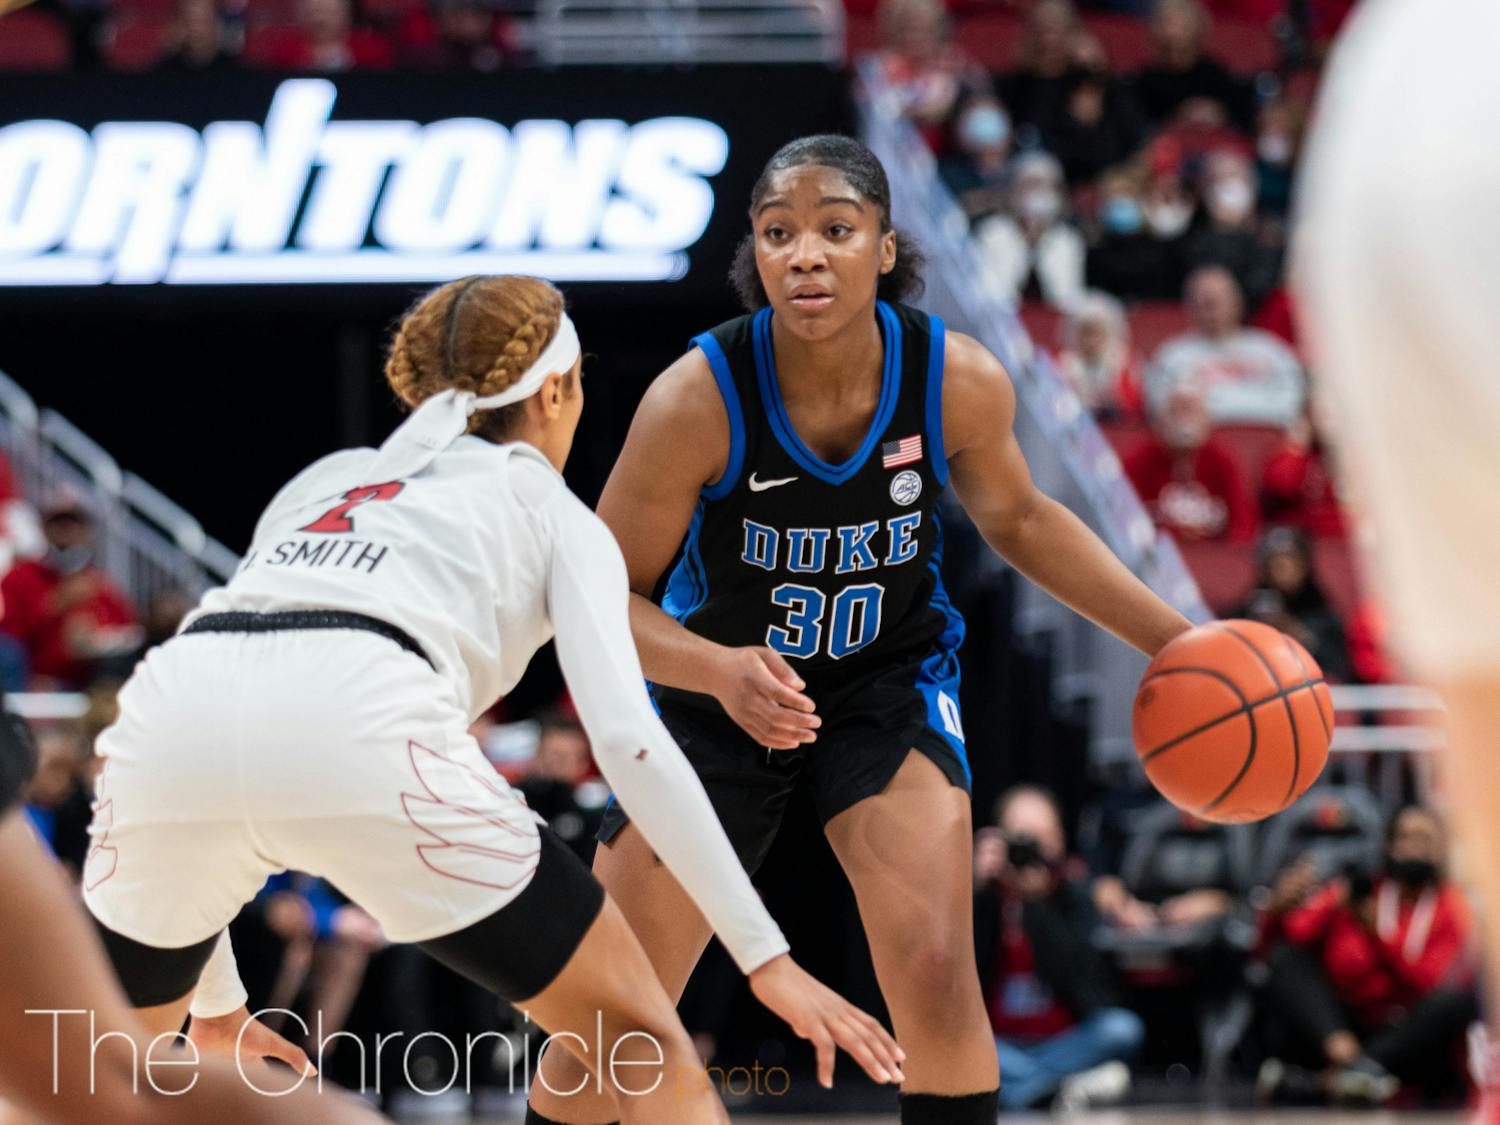 Despite 25 points from Shayeann Day-Wilson, the Blue Devils could not complete a second-half comeback.